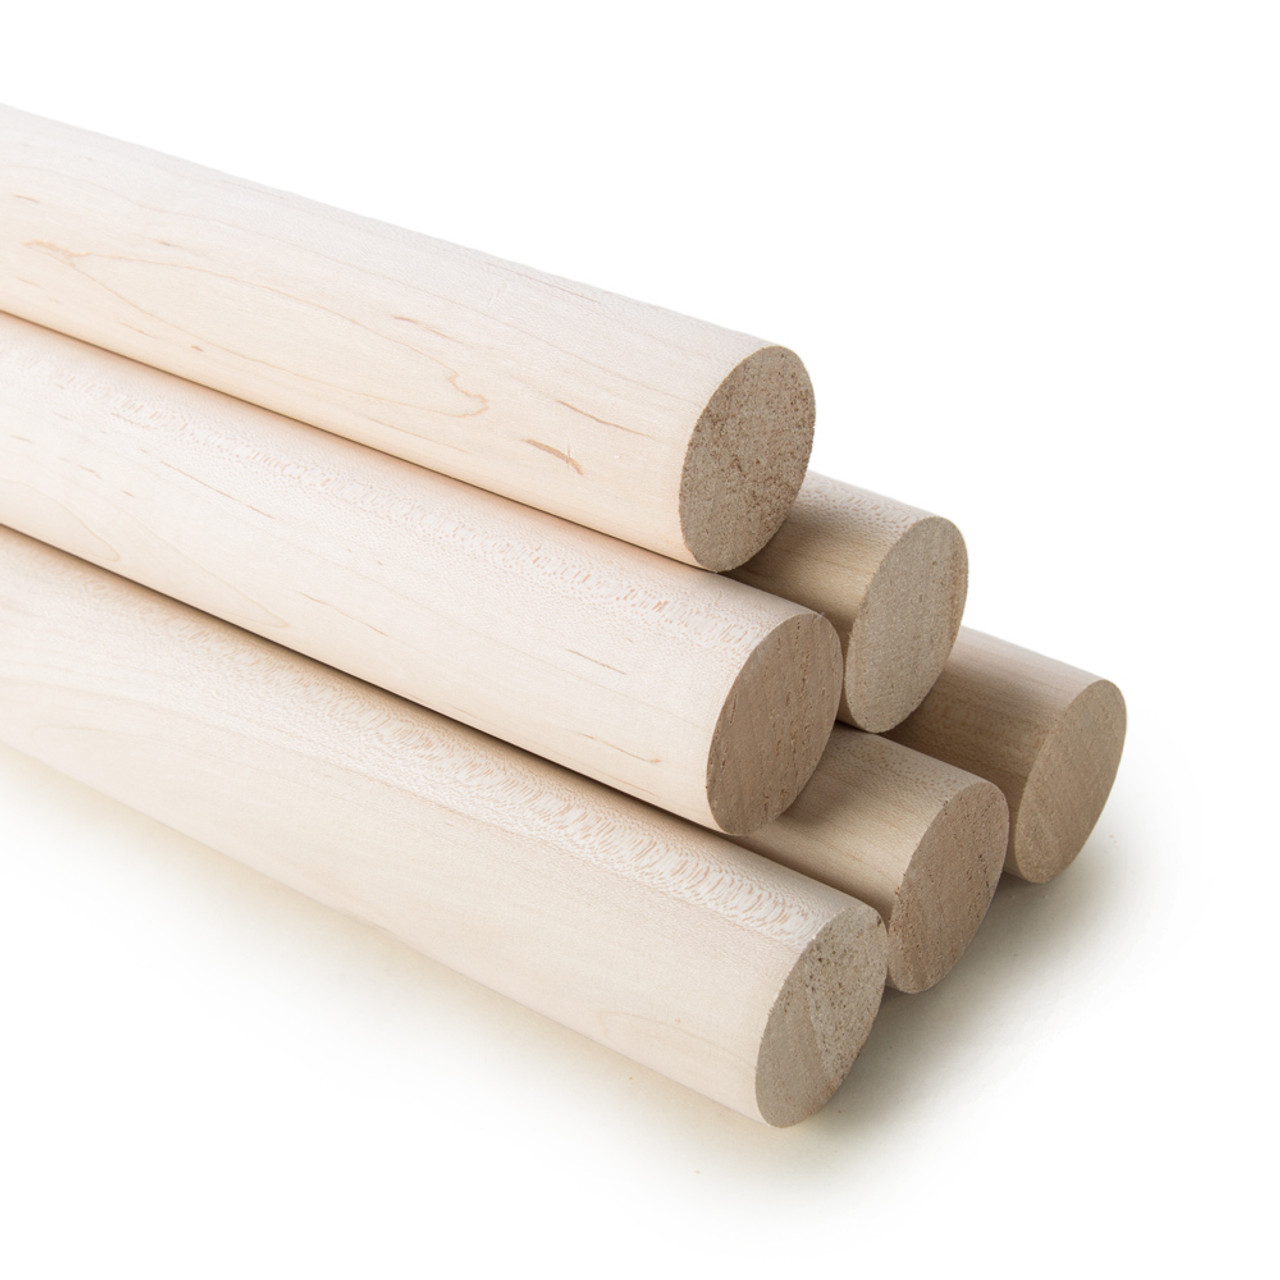 1/2” Dowels, Split in Half Dowels, Quantity 15,18” Length, Hobby, Log Cabin, Hobby Wood Products